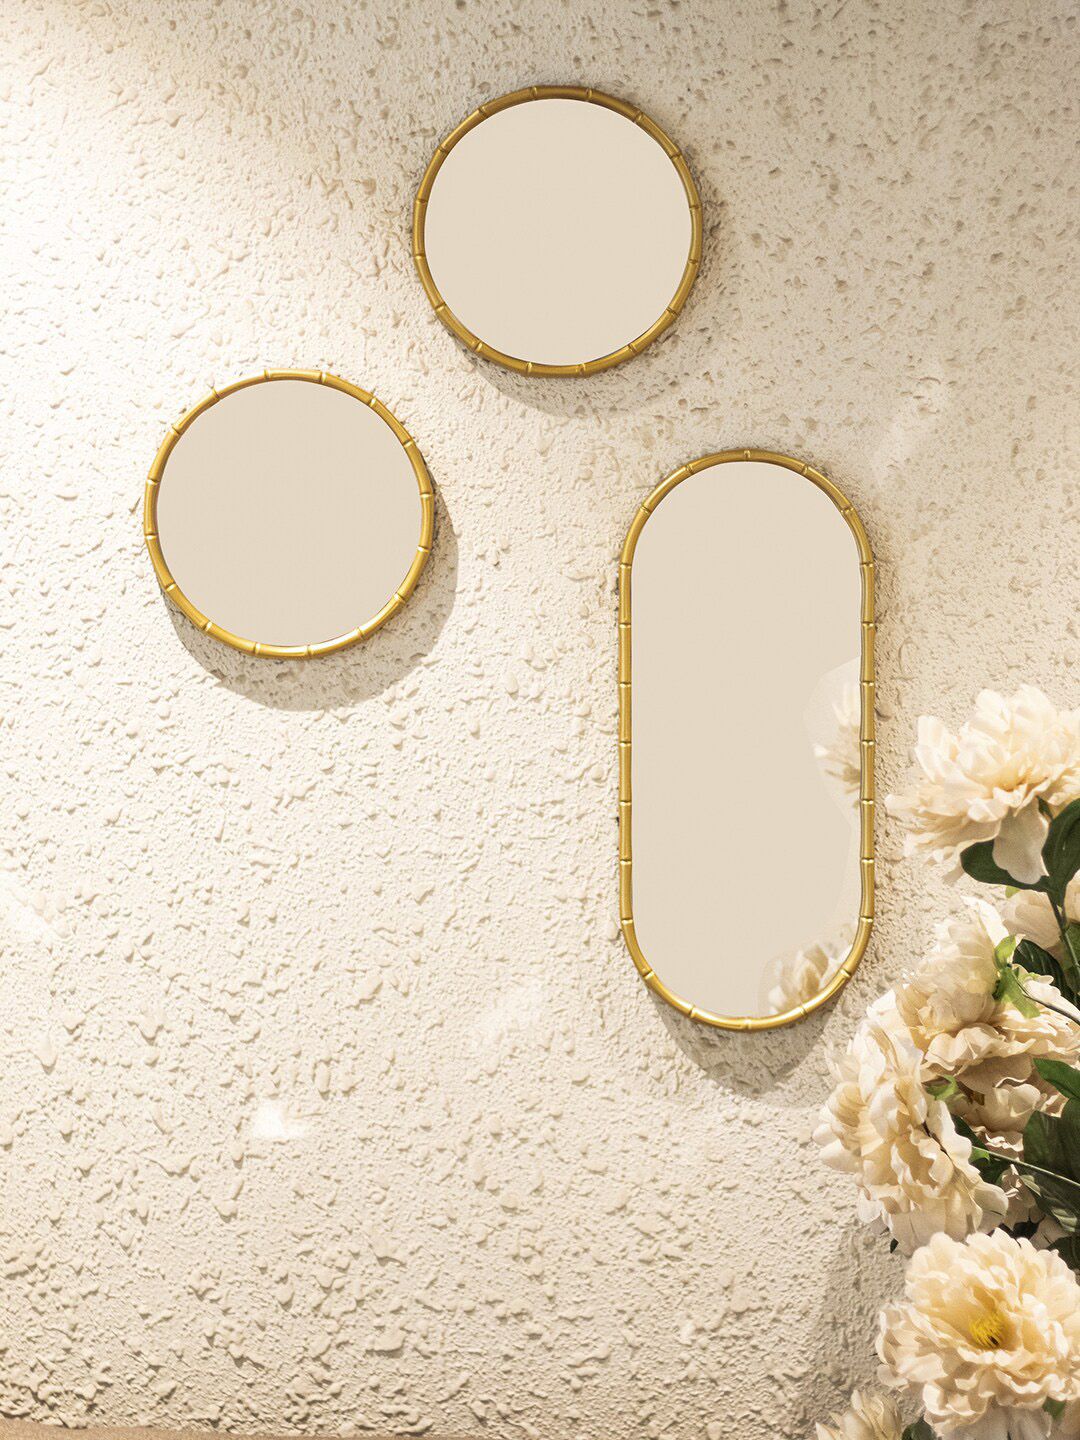 MARKET99 Set Of 3 Gold-Toned Solid Decorative Wall Hanging Mirrors Price in India